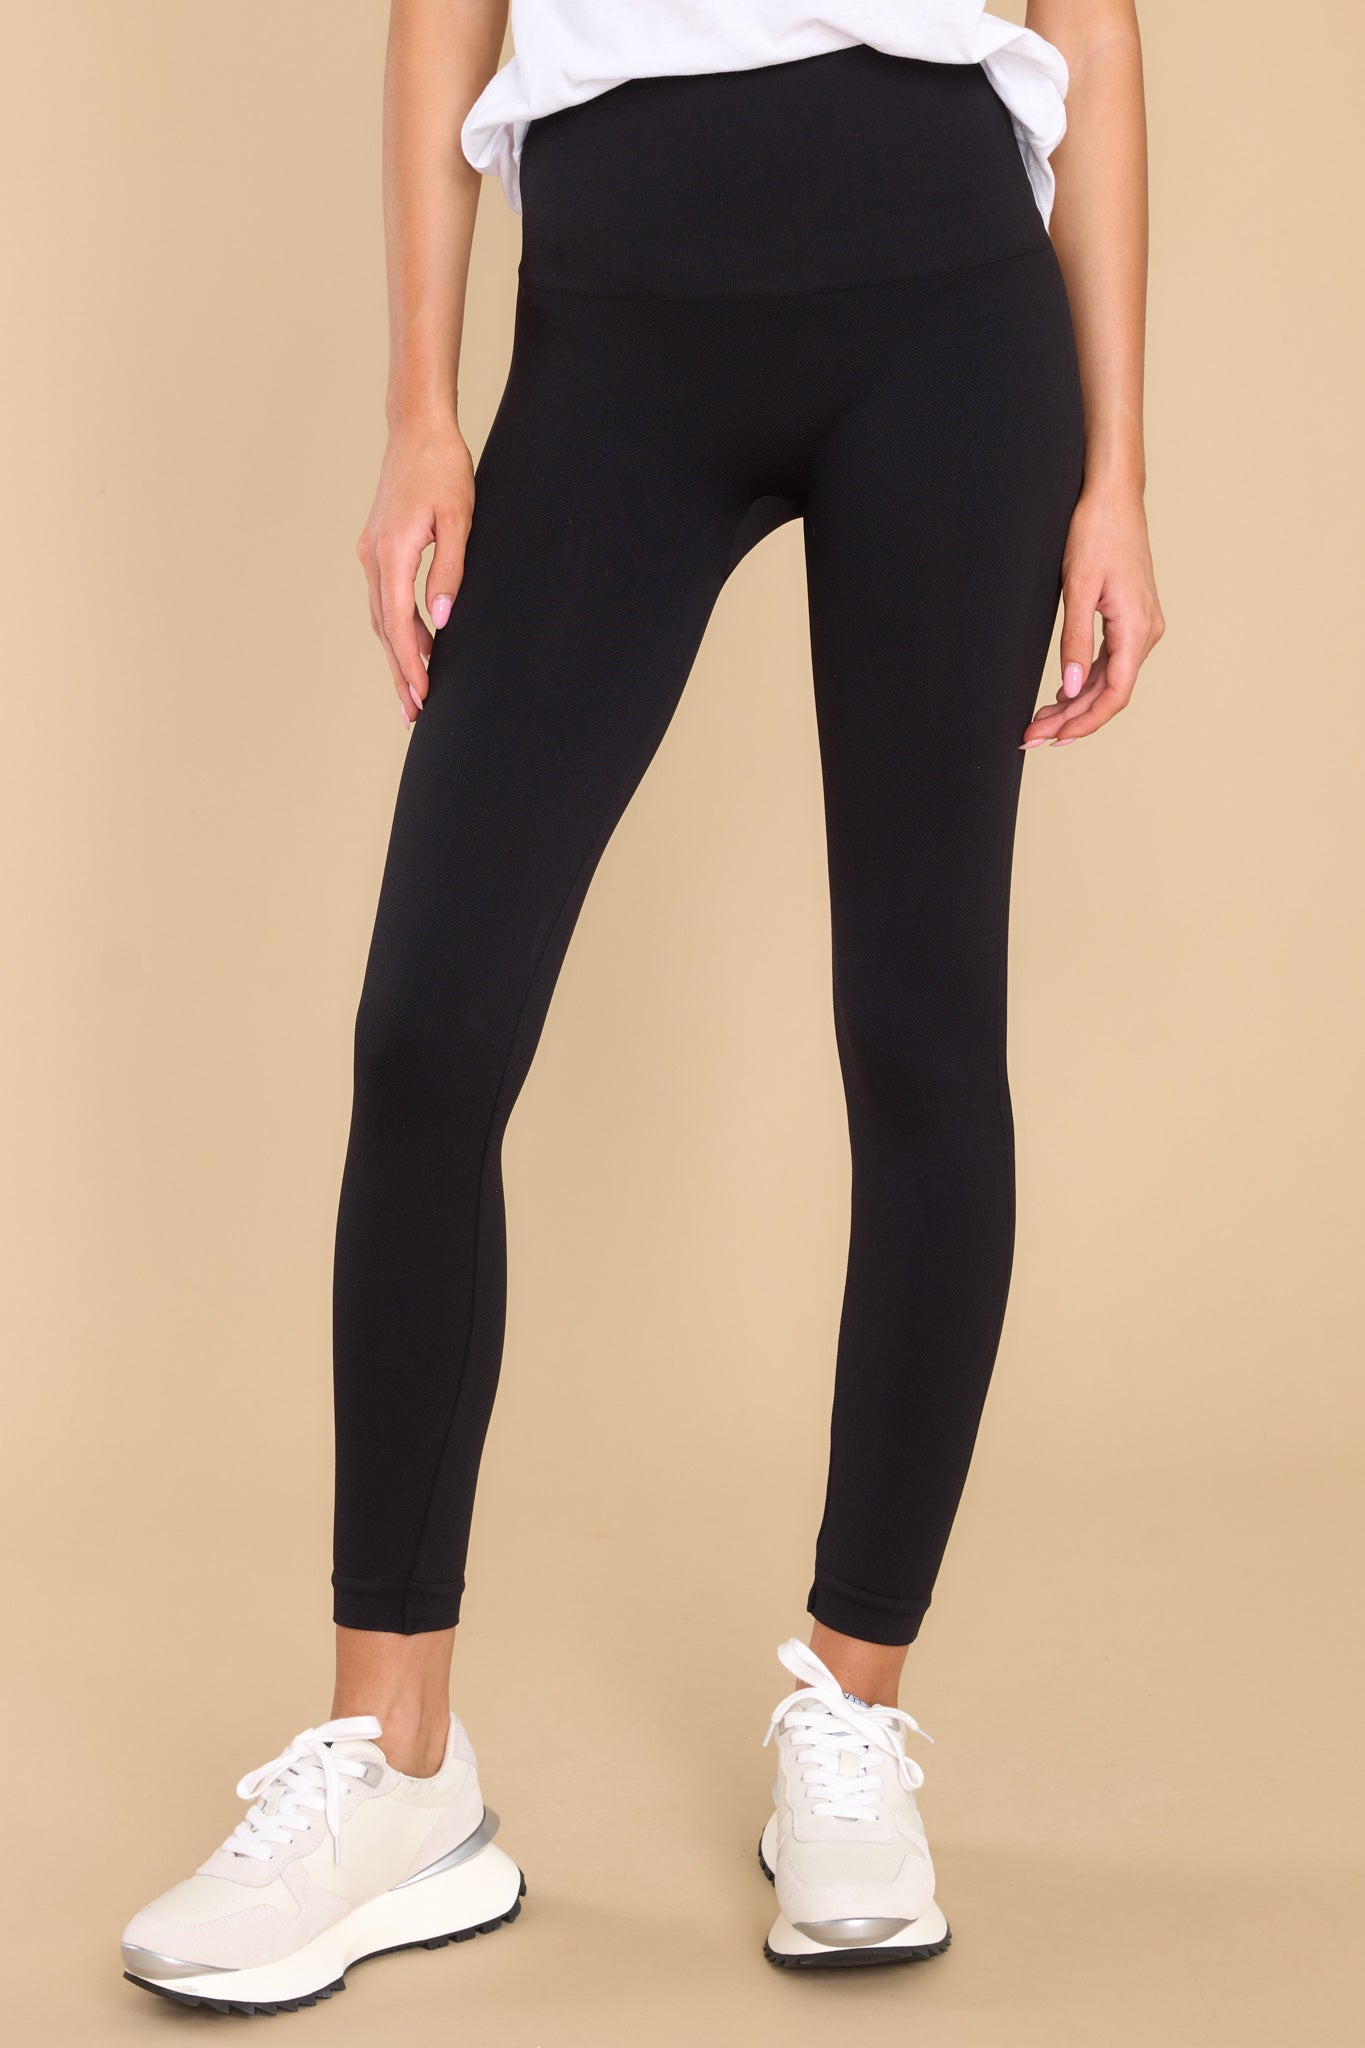 Buy SPANX® Eco Care Black High Waisted Seamless Leggings from the